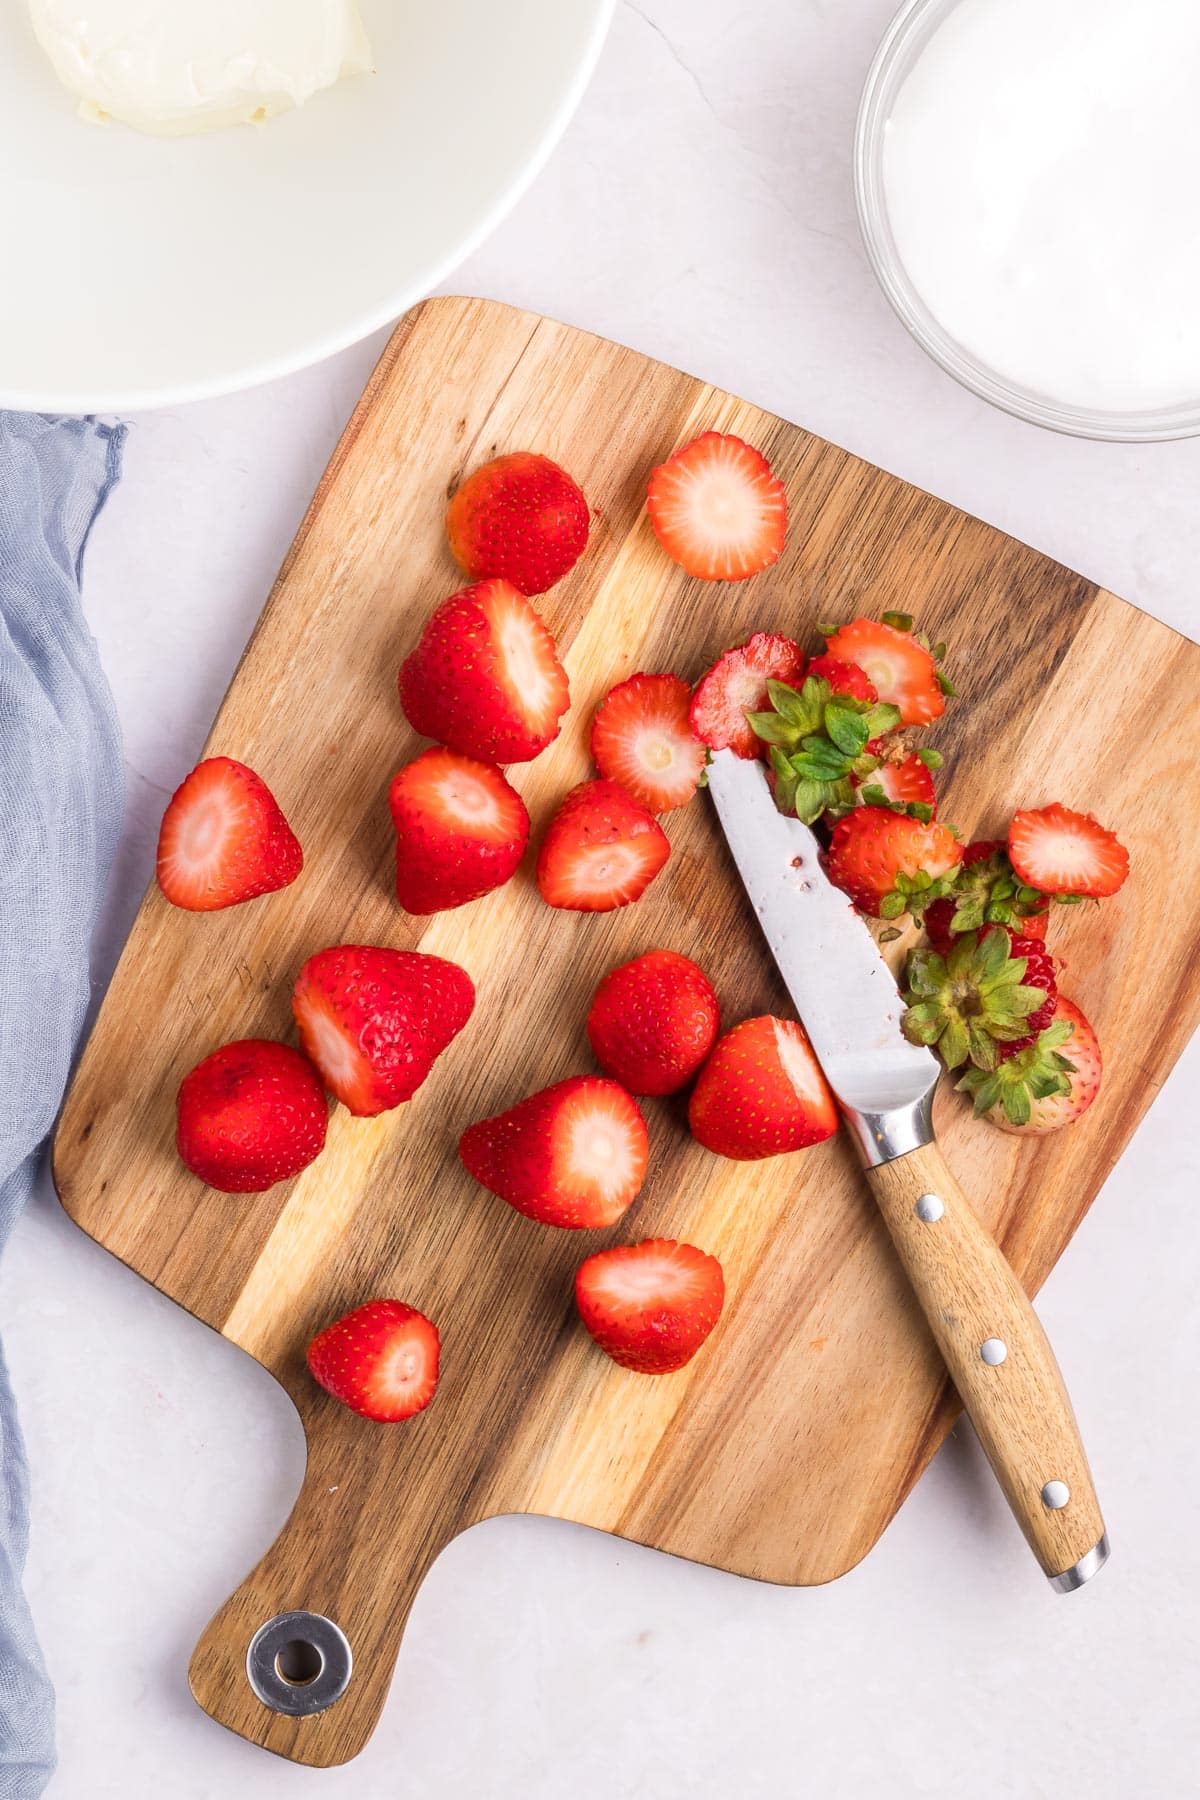 A wooden cutting board holds sliced strawberries and a paring knife, with a bowl and a cloth on the side.